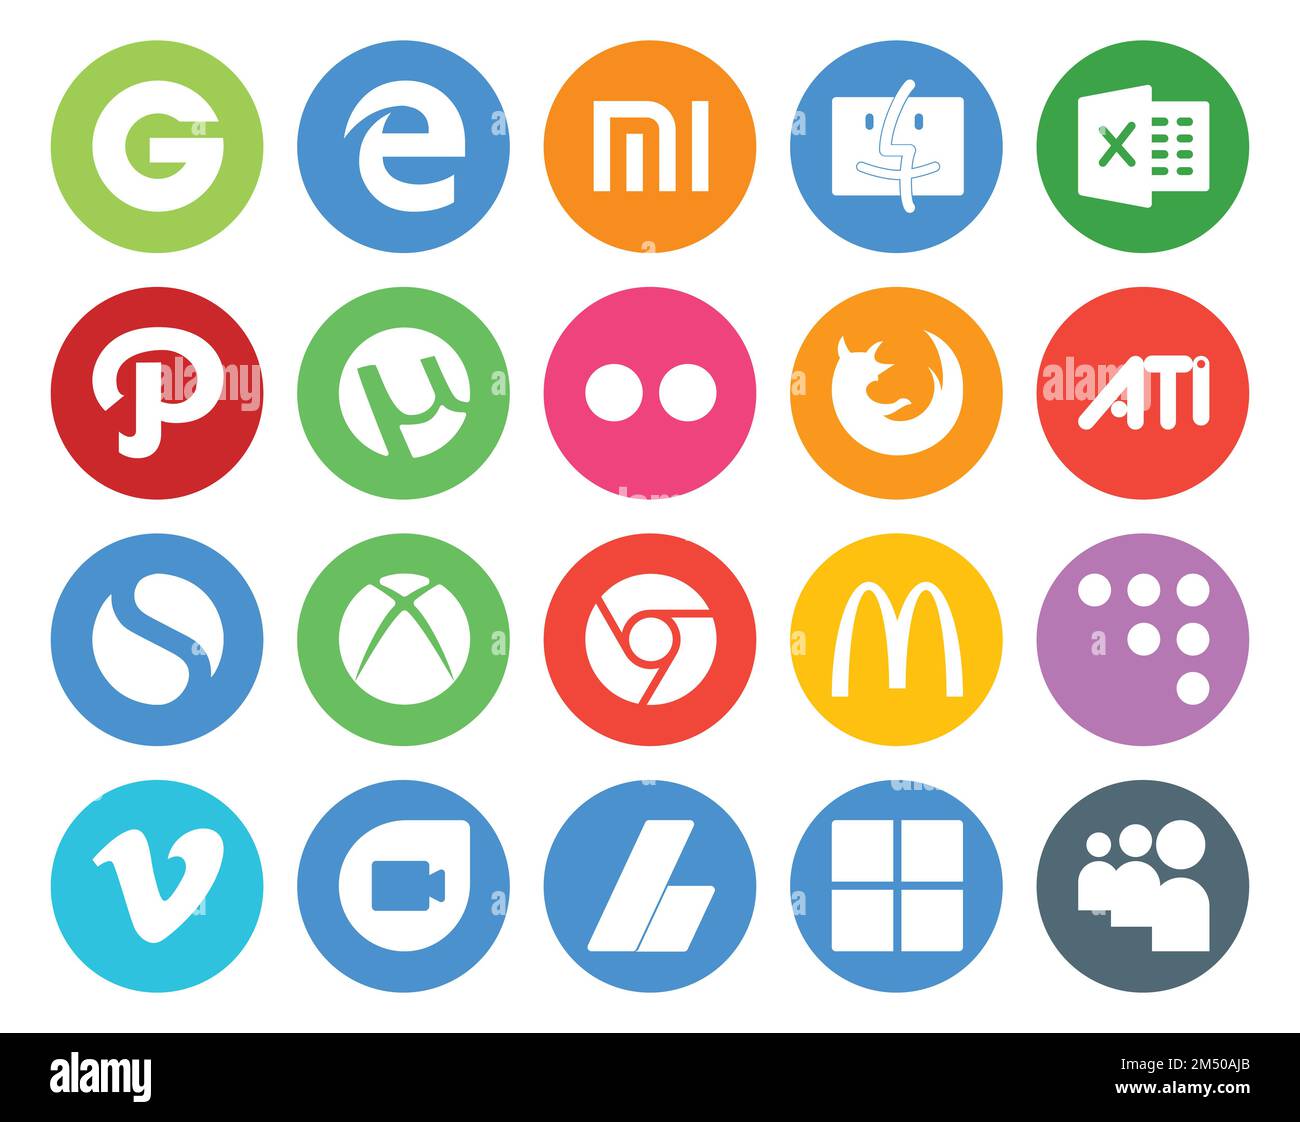 Firefox browser Stock Vector Images - Alamy